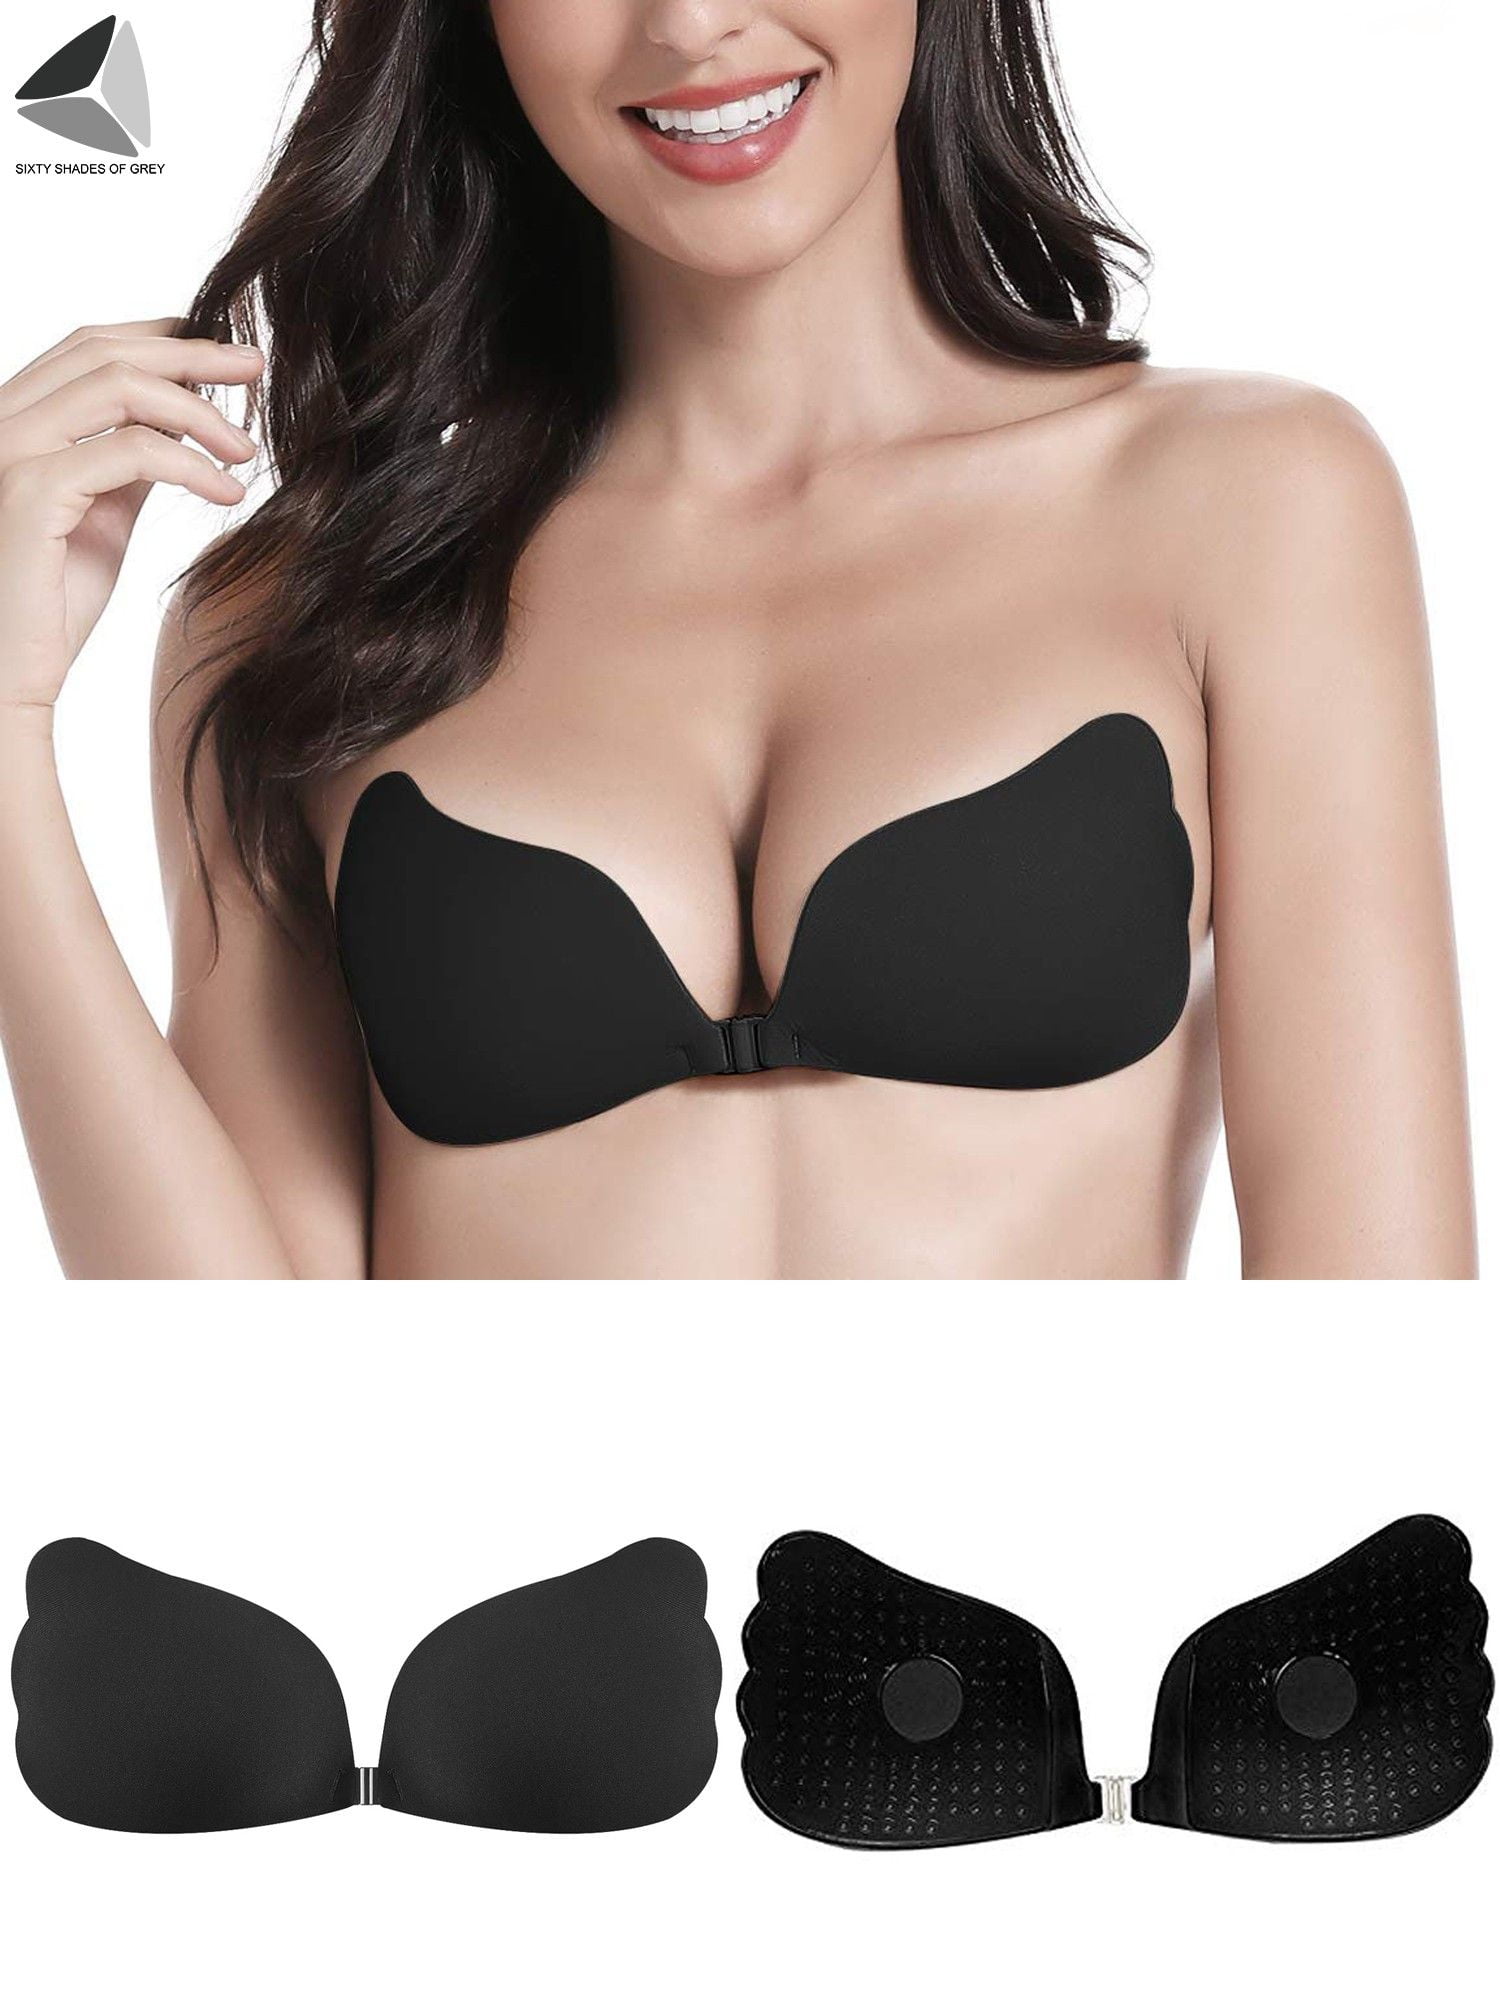 Women Invisible Bras Butterfly Wing Silicone Sexy Bra Adhesive Bras  Strapless Backless Self Bras Shell Push Up Bra LDH198 From 2,76 €